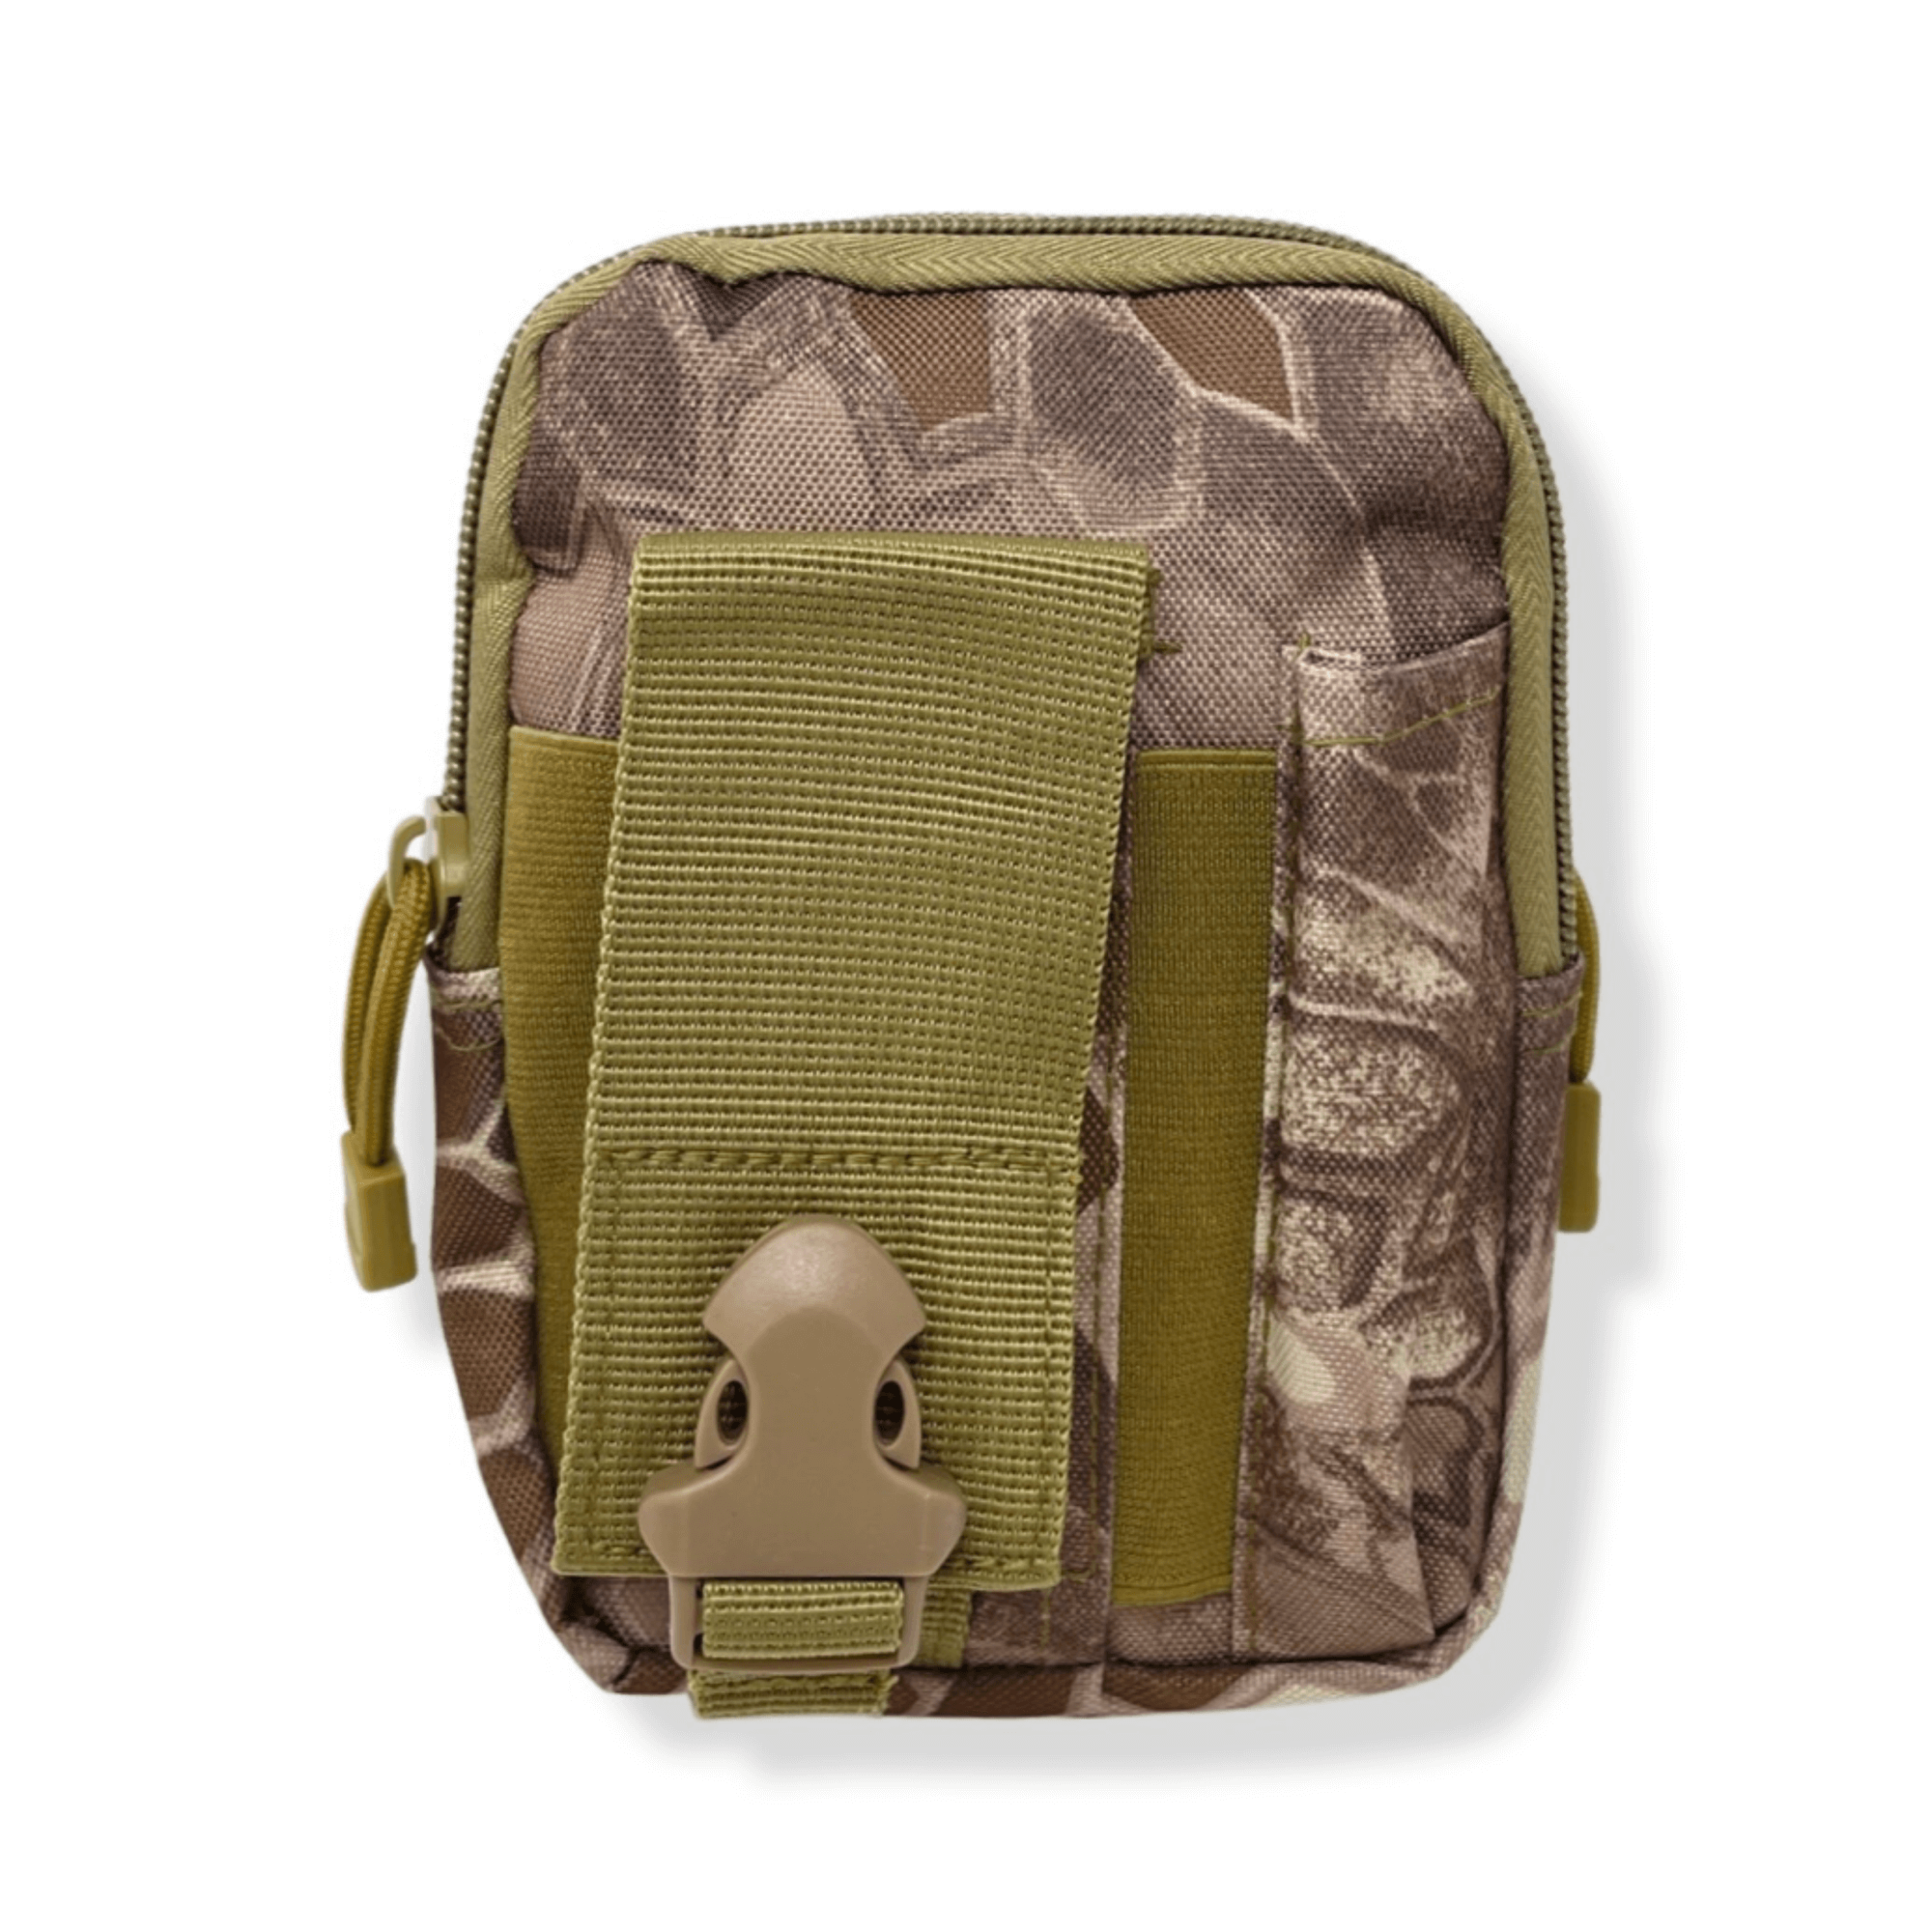 Tactical MOLLE Pouch & Waist Bag for Hiking & Outdoor Activities-33